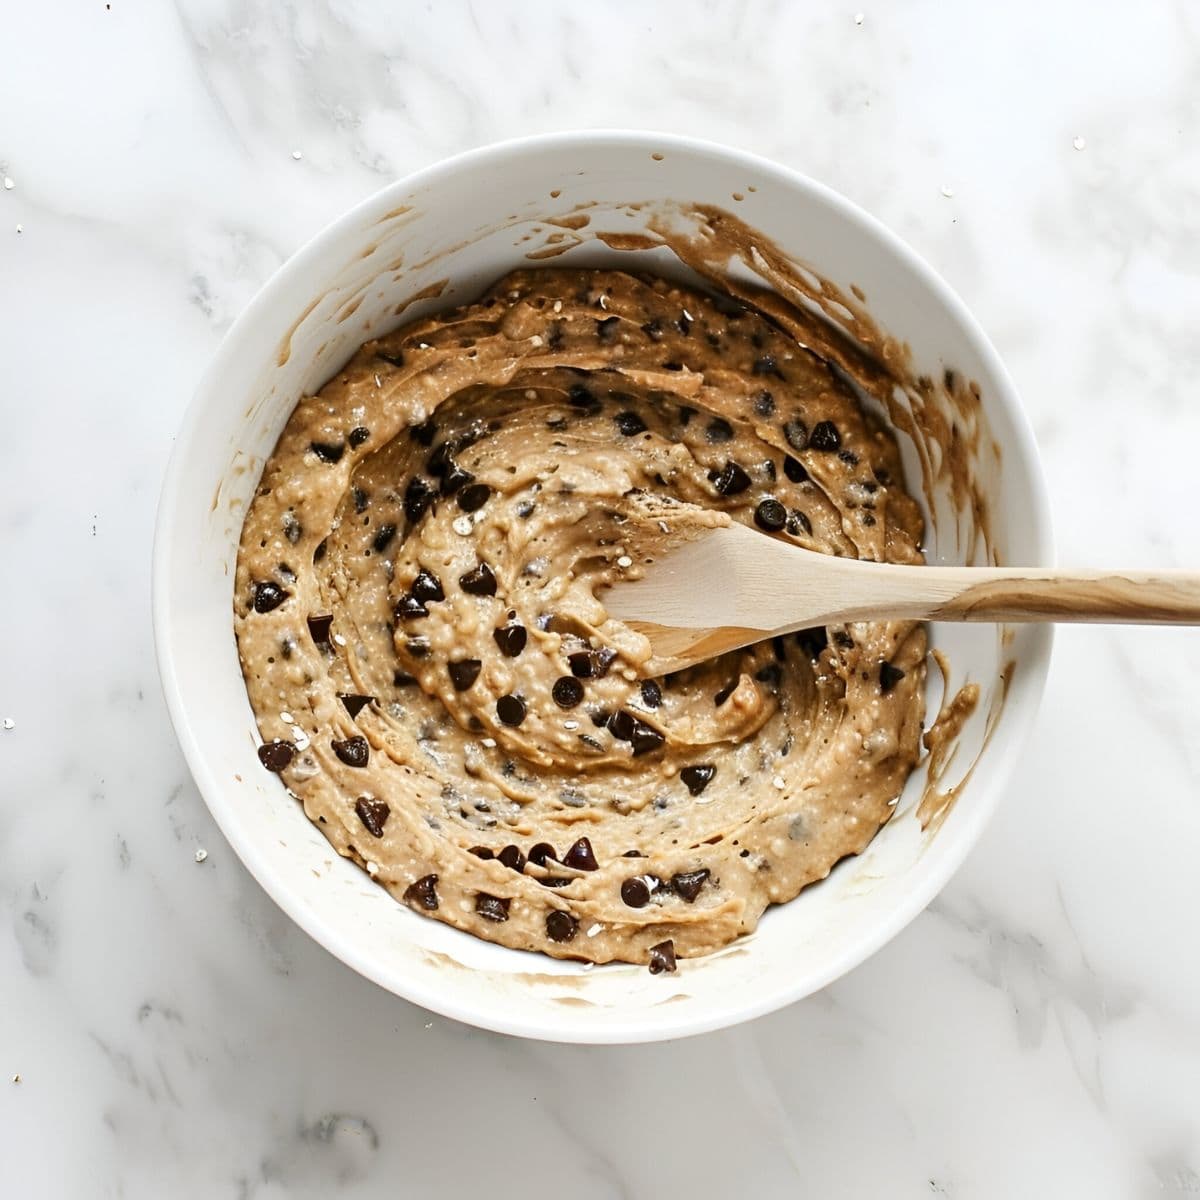 Chocolate Chip Oatmeal Muffin Batter in a White Bowl with a Wooden Spoon- Top View